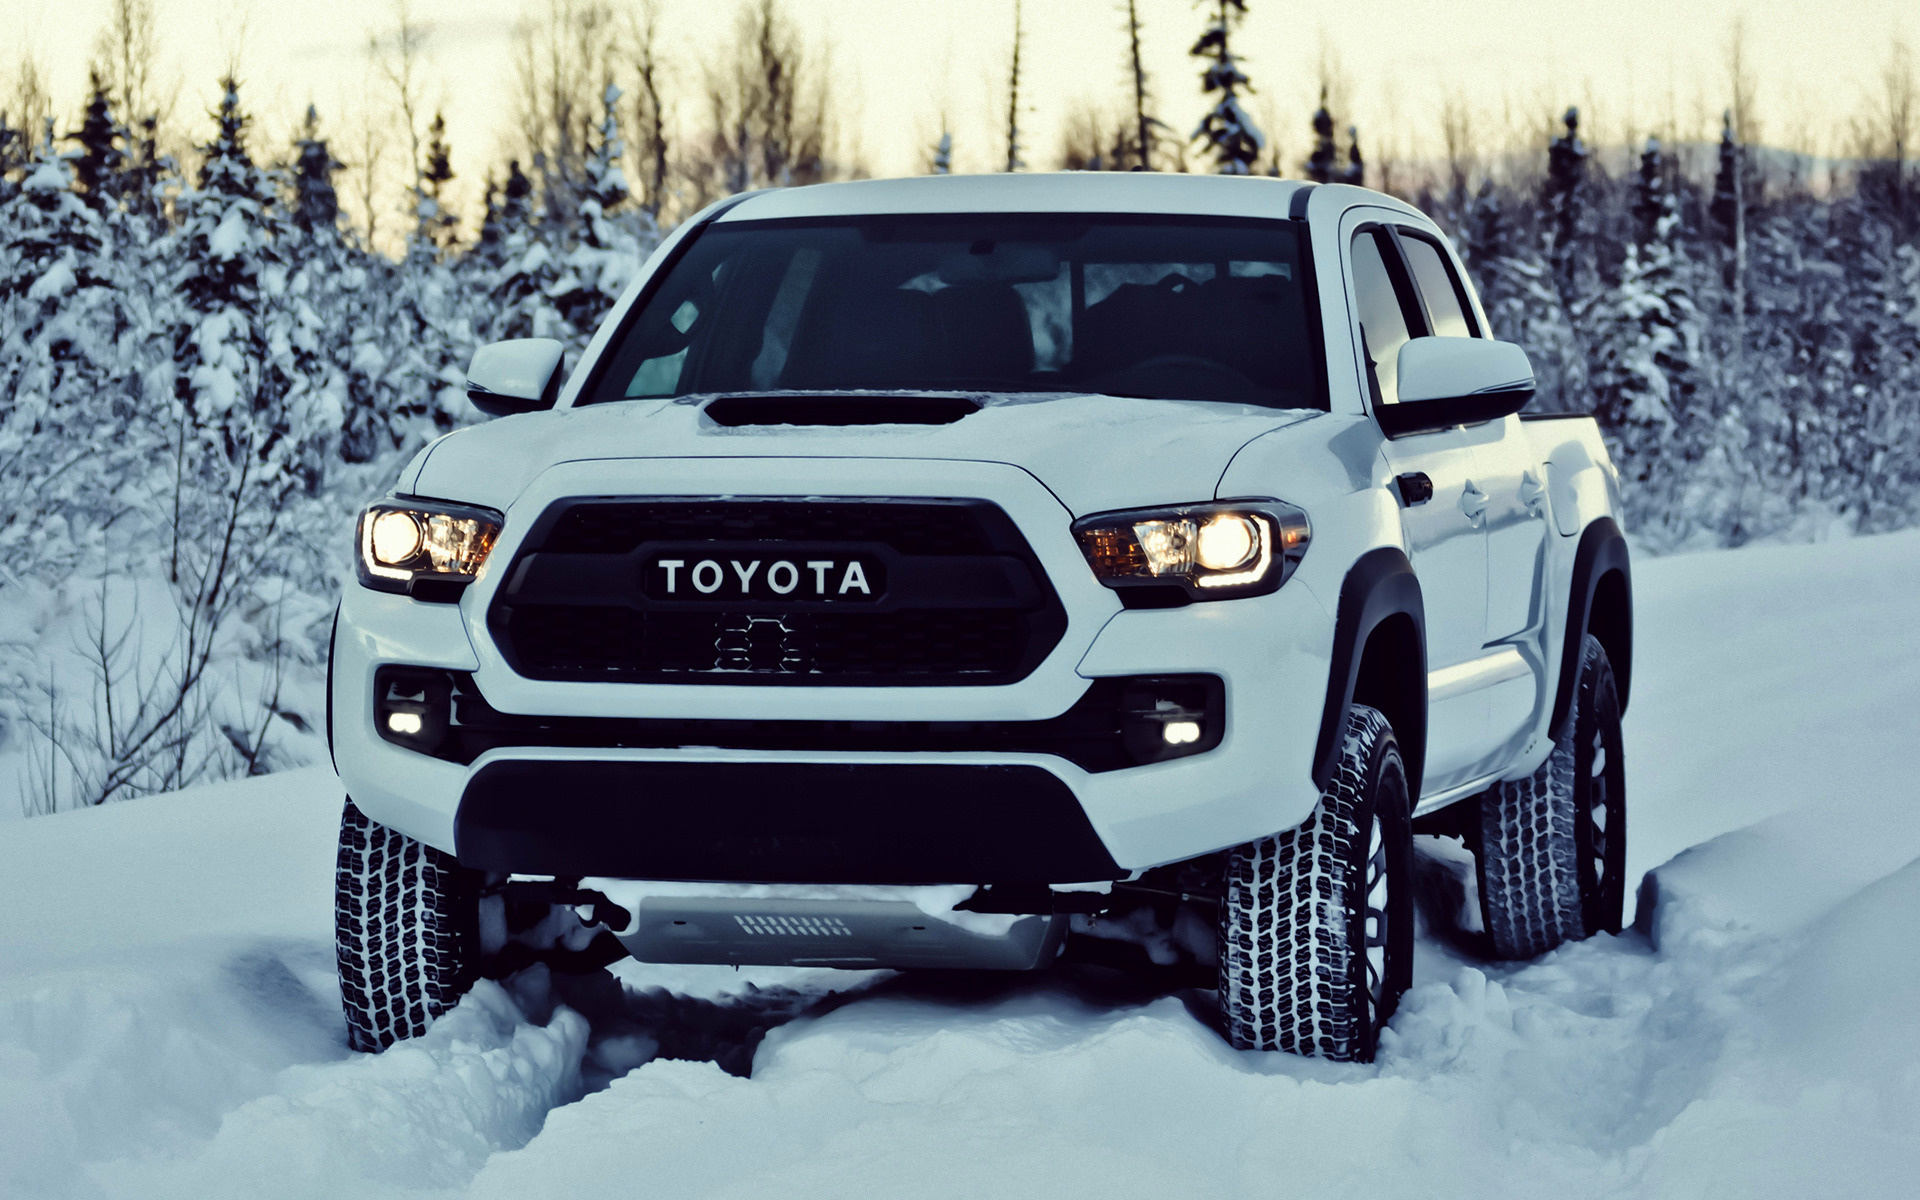 Toyota Tacoma Trd Pro Double Cab Wallpaper And HD Tacoma Trd Pro HD Wallpaper